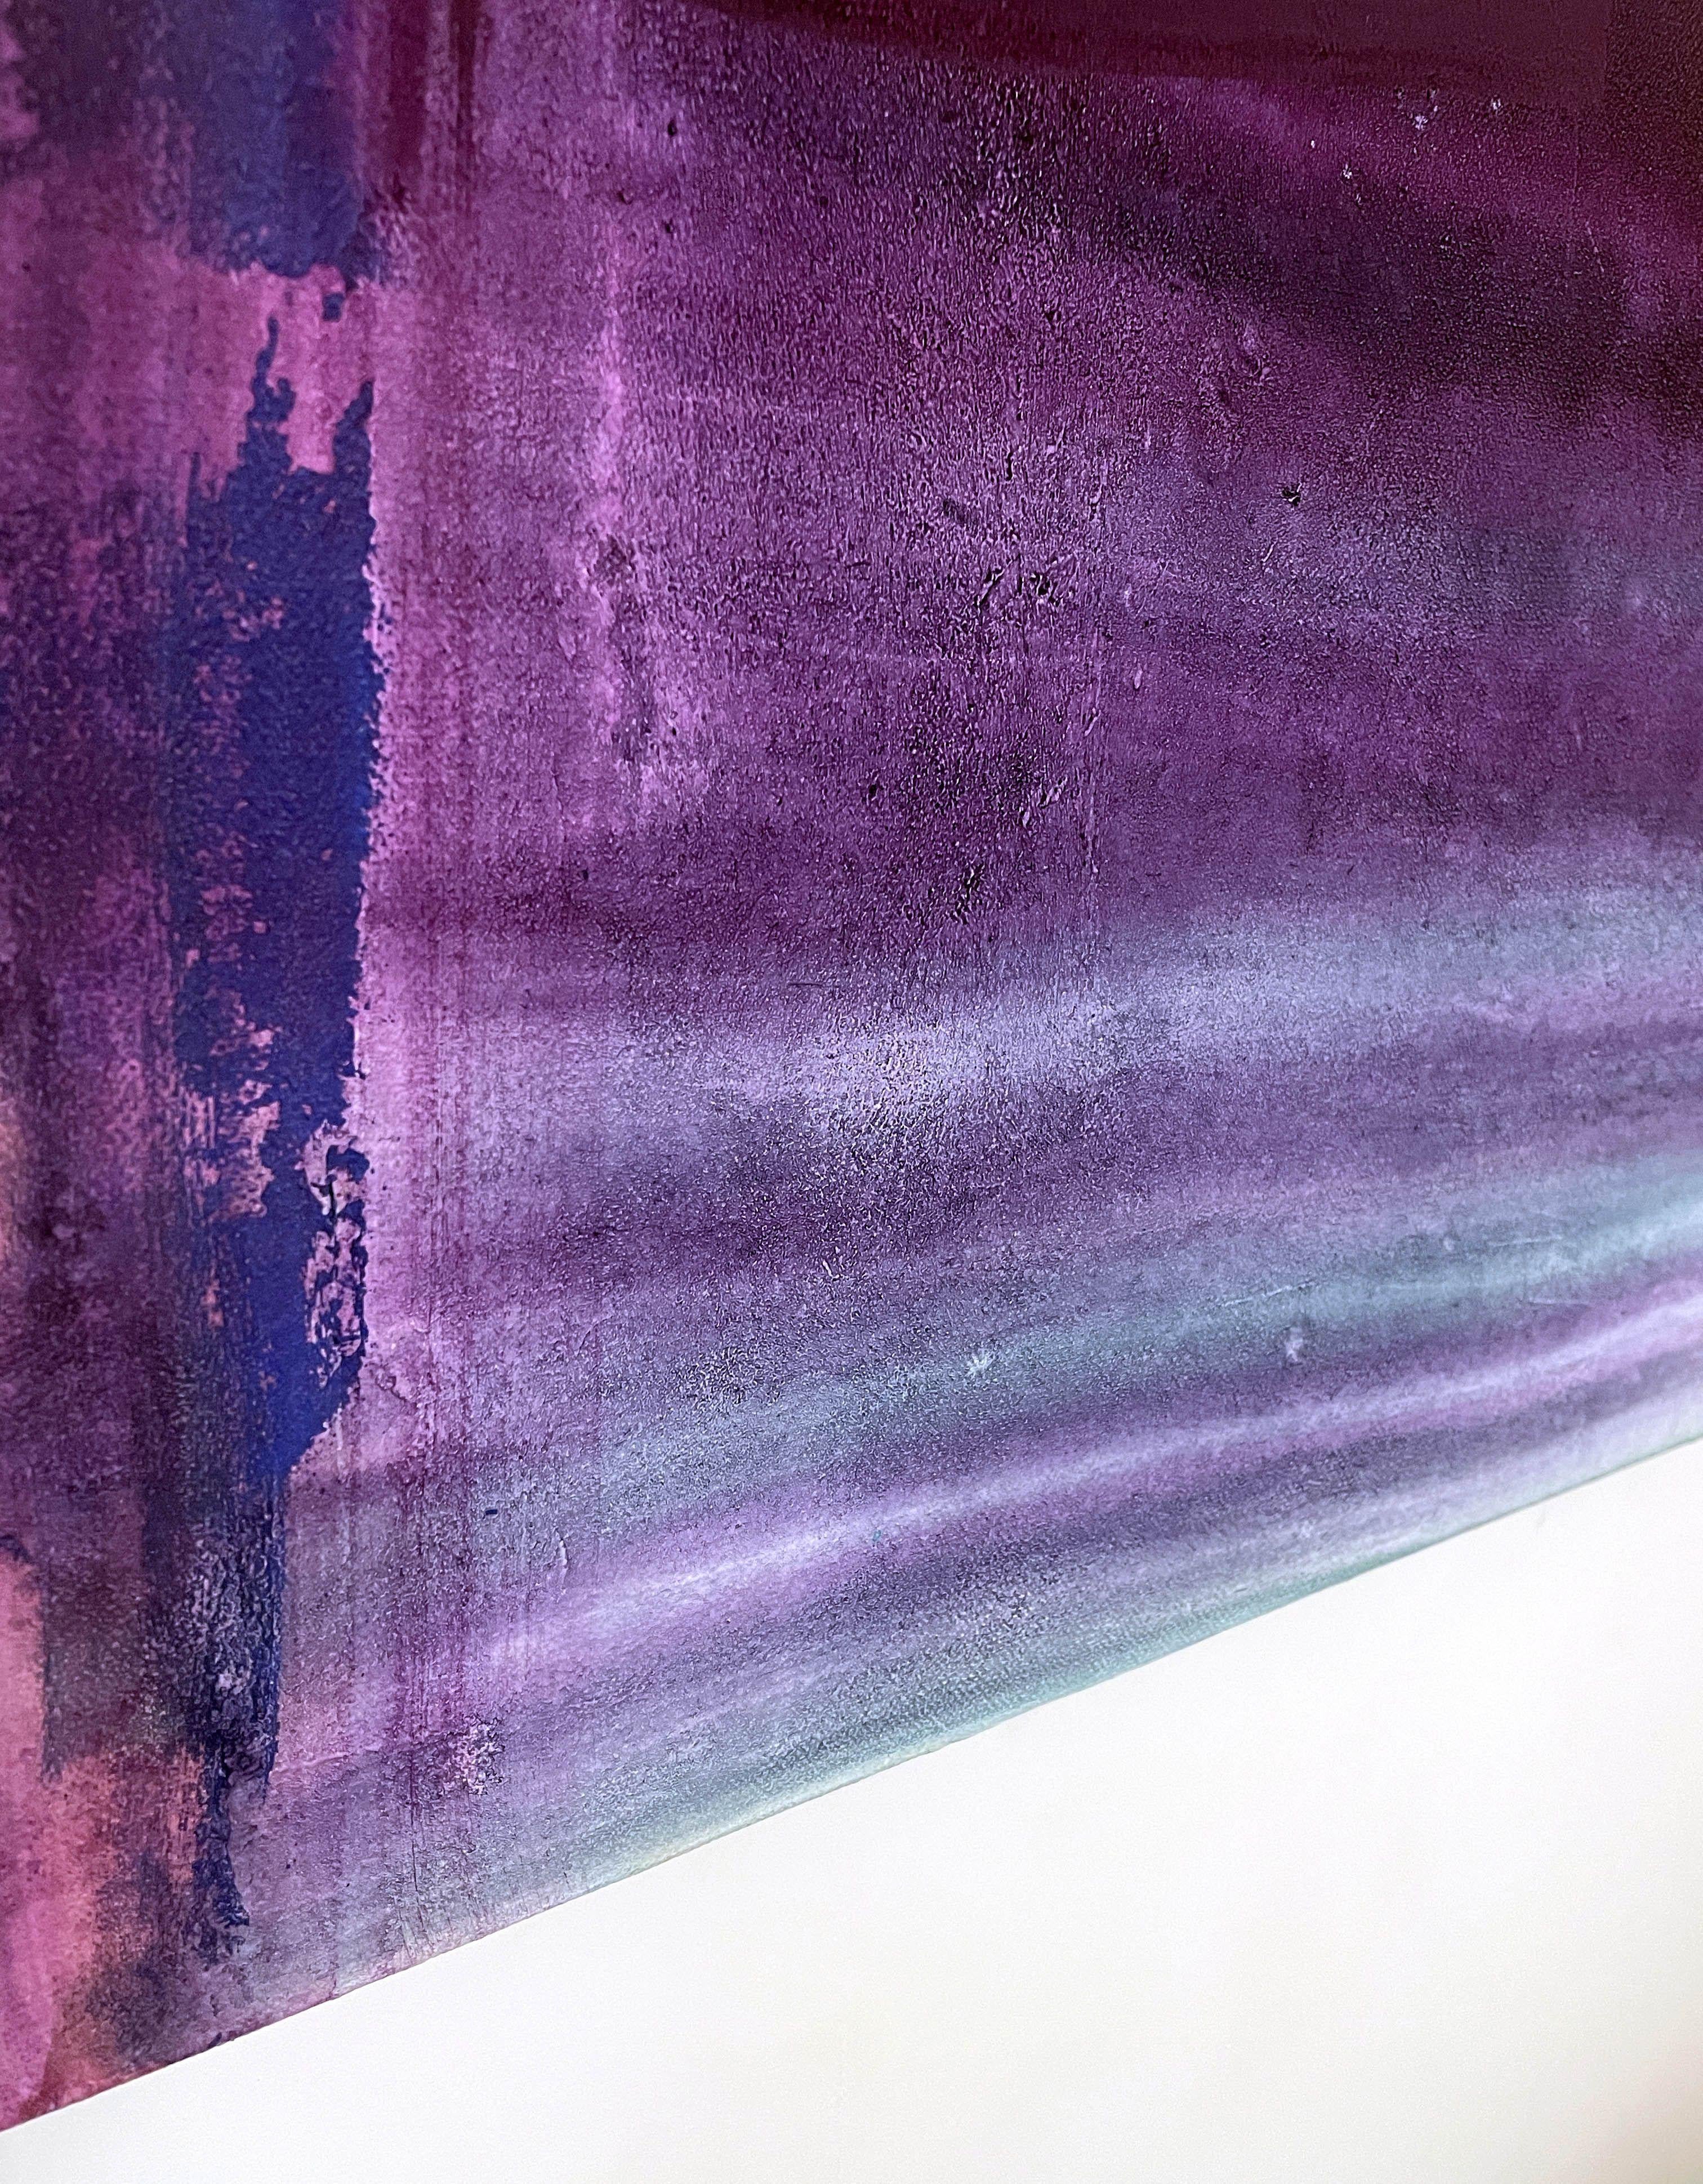 Original minimalistic abstract painting.   The shades of purple, emerald in combination with orange and spray paint burgundy line.    DIMENSIONS : 70 X 90 cm    DETAILS :     - High quality acrylic, spray paint and pigments on cotton canvas  -